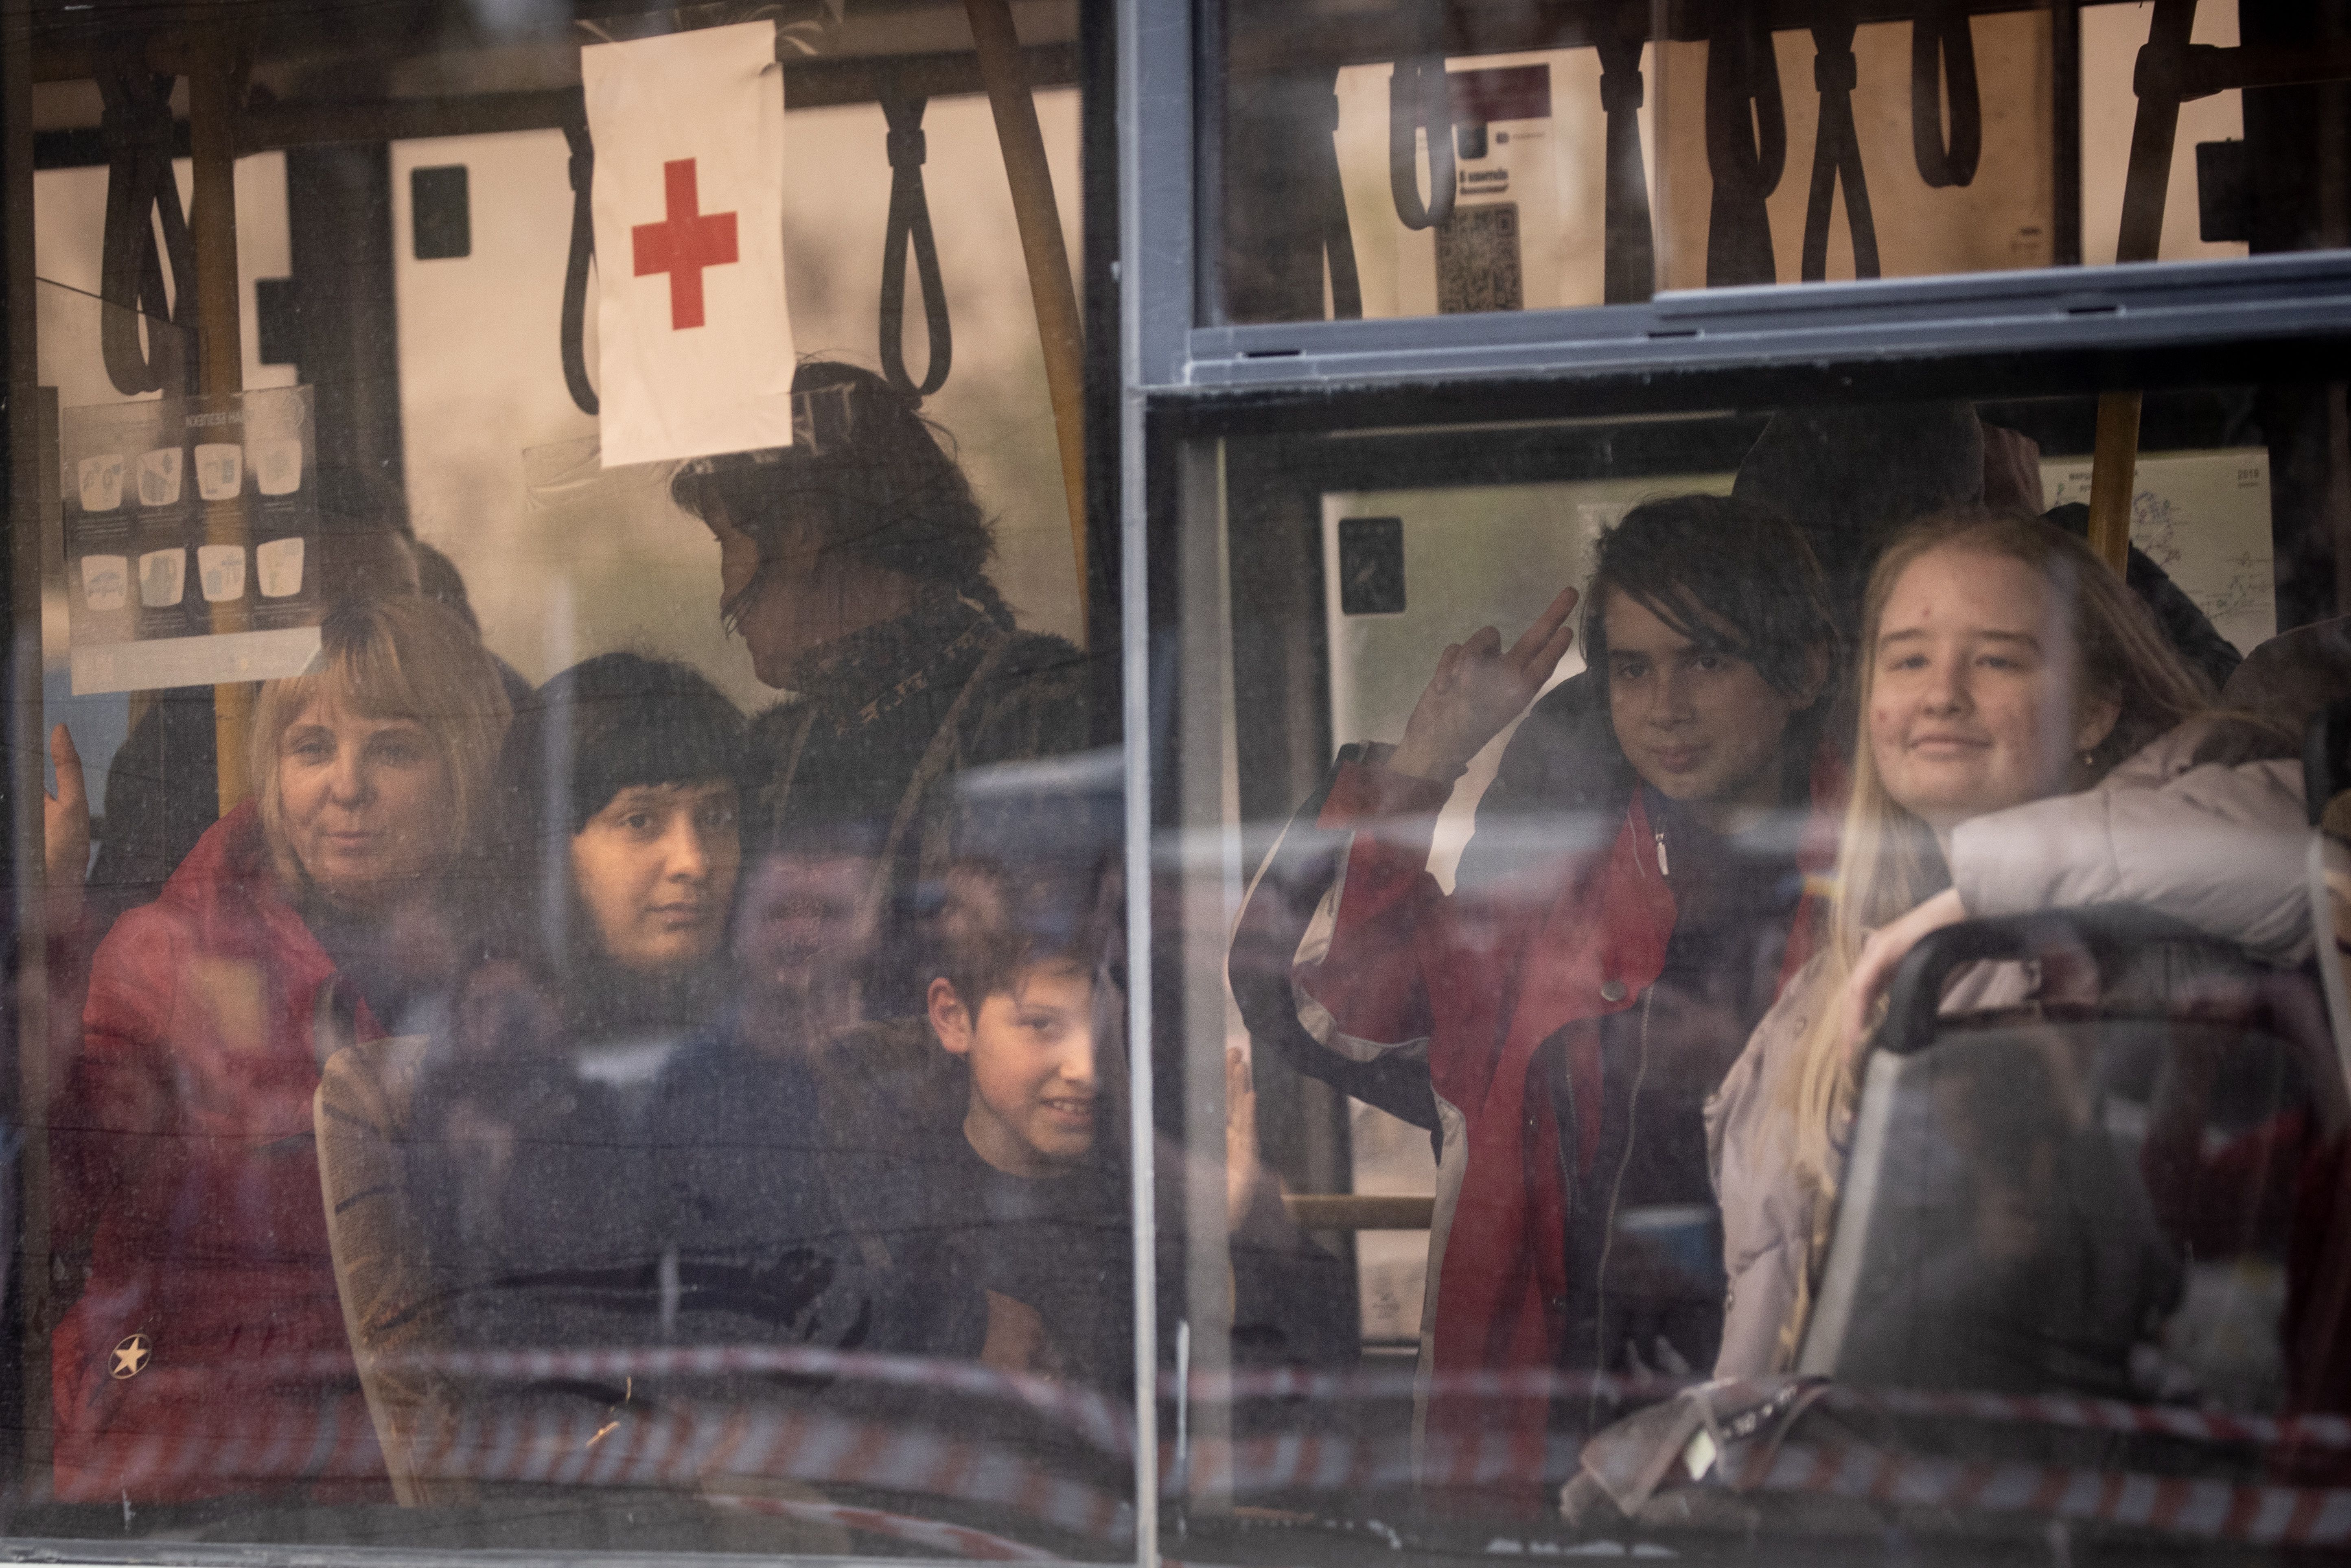 Evacuees including some from the Azovstal plant wave as they arrive on a bus at an evacuation point for people fleeing the Azovstal plant, Mariupol,